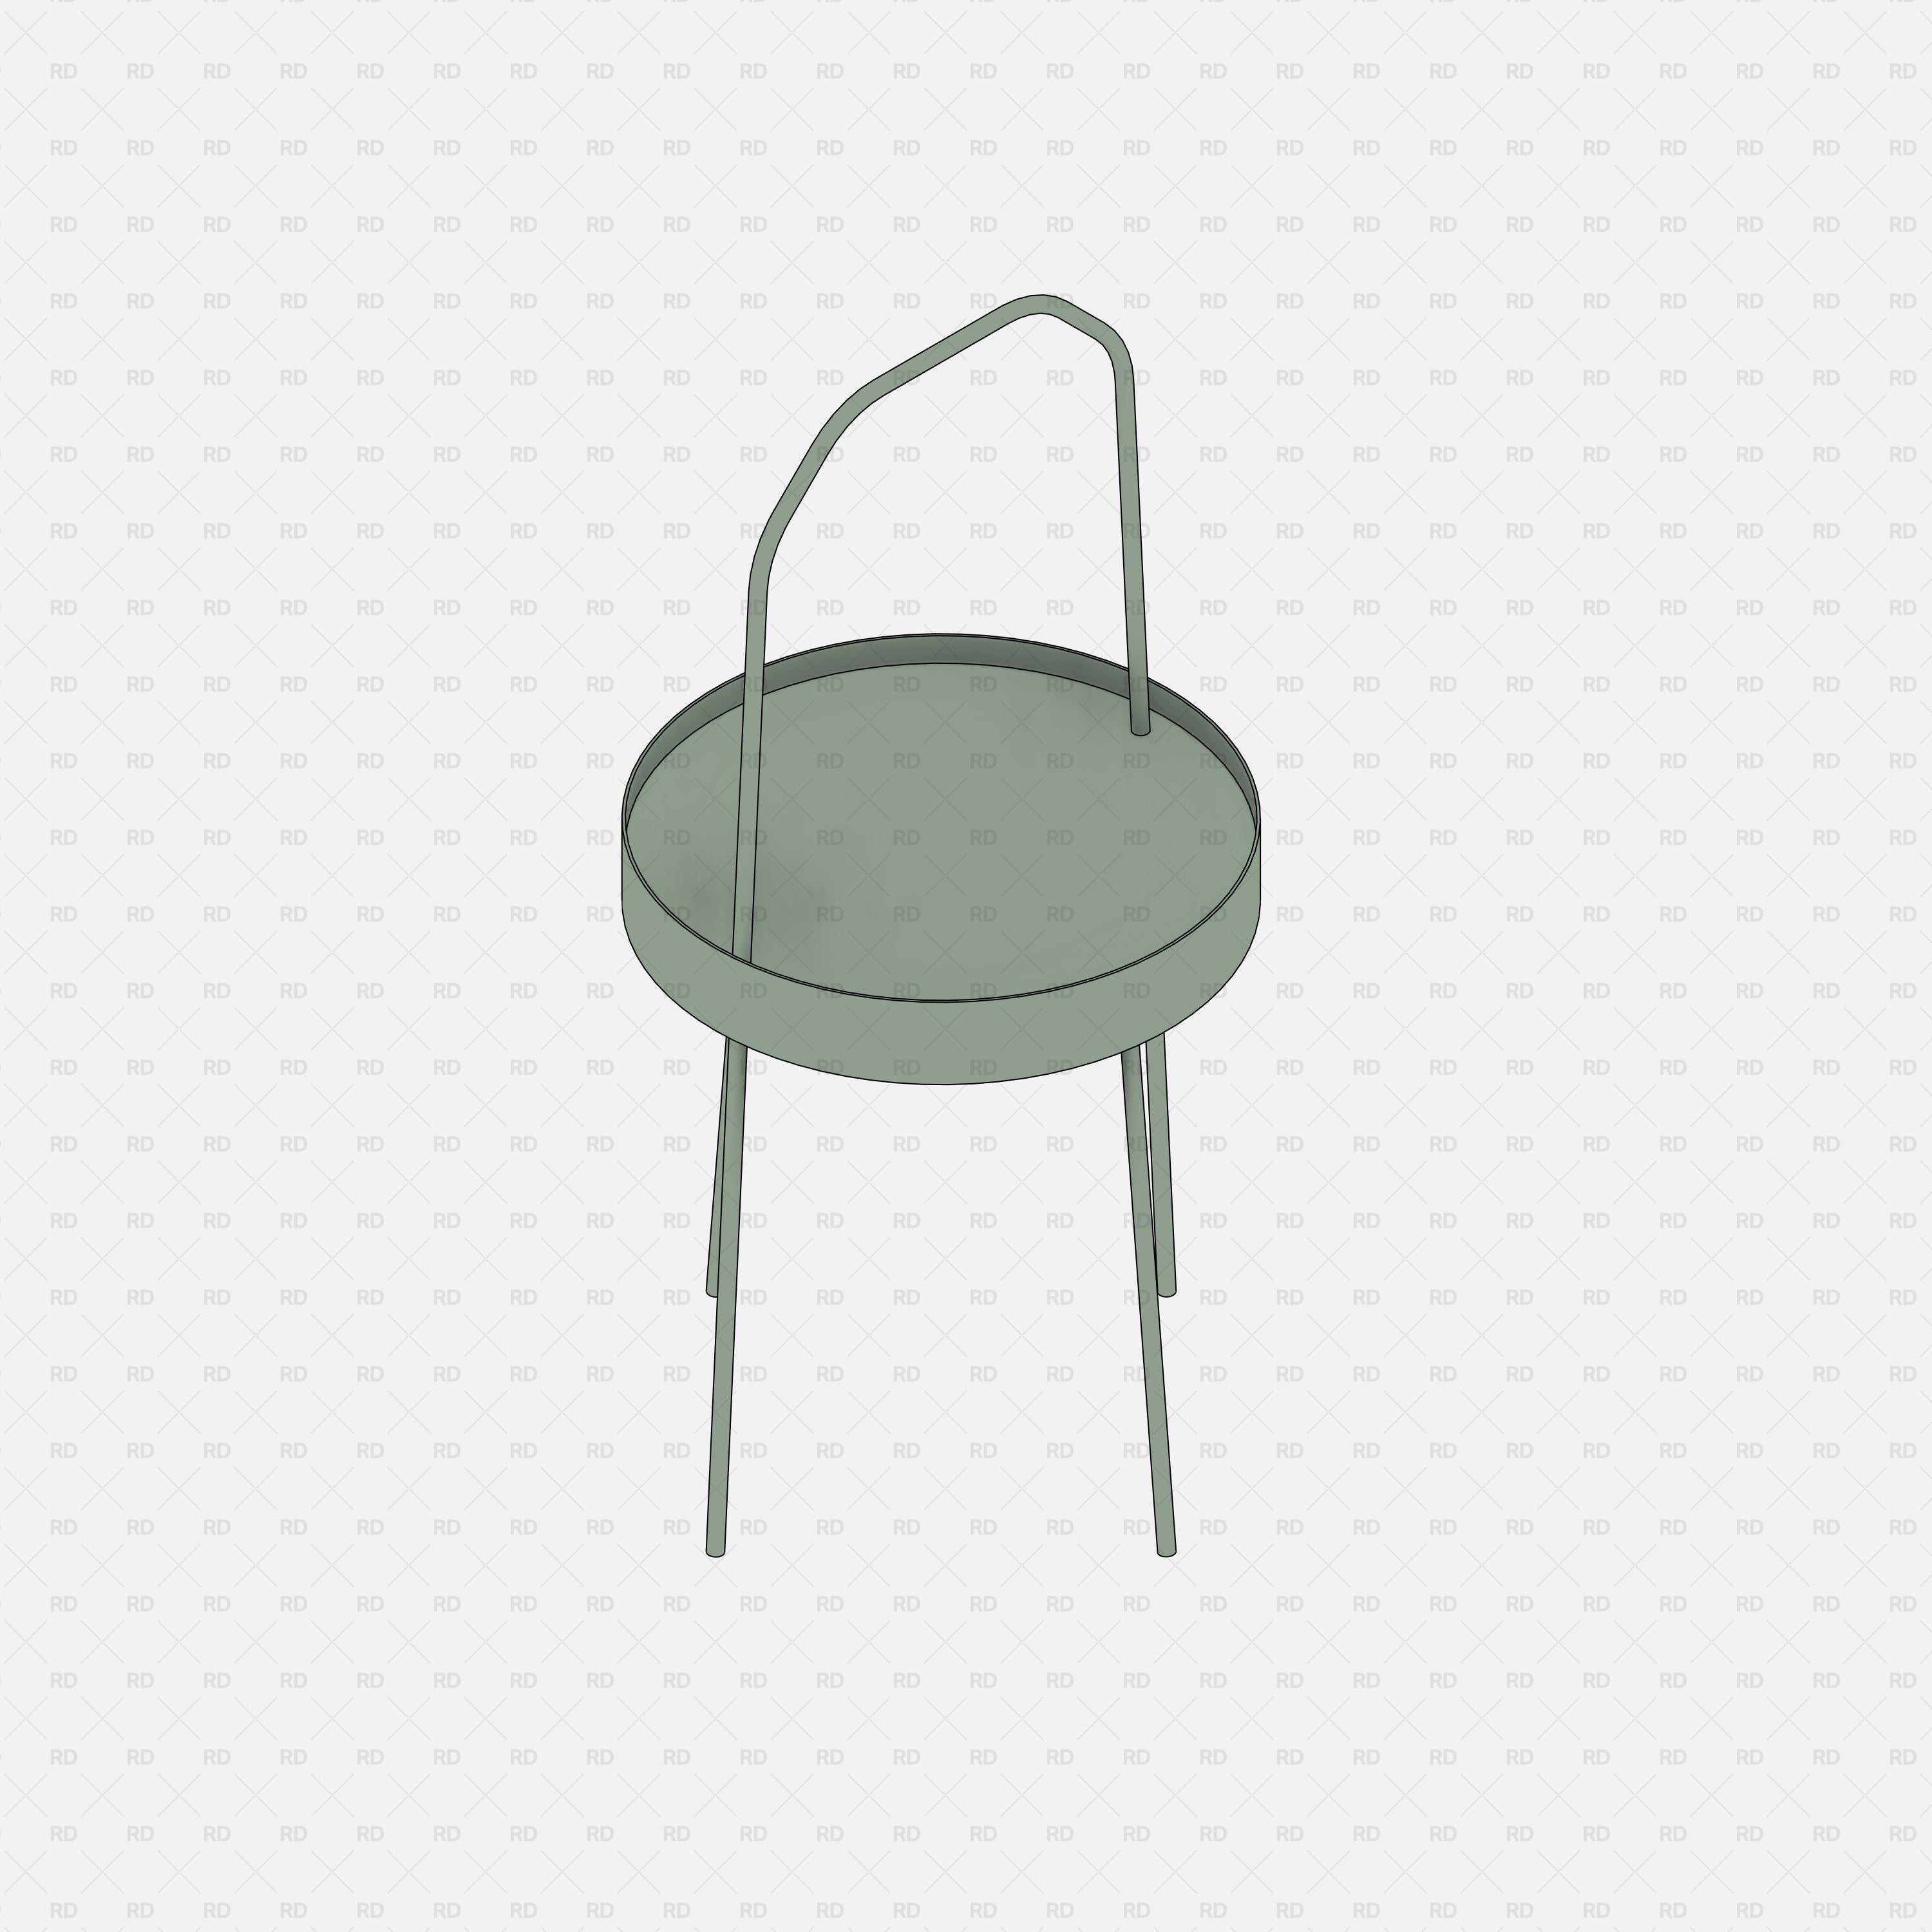 download side table revit family